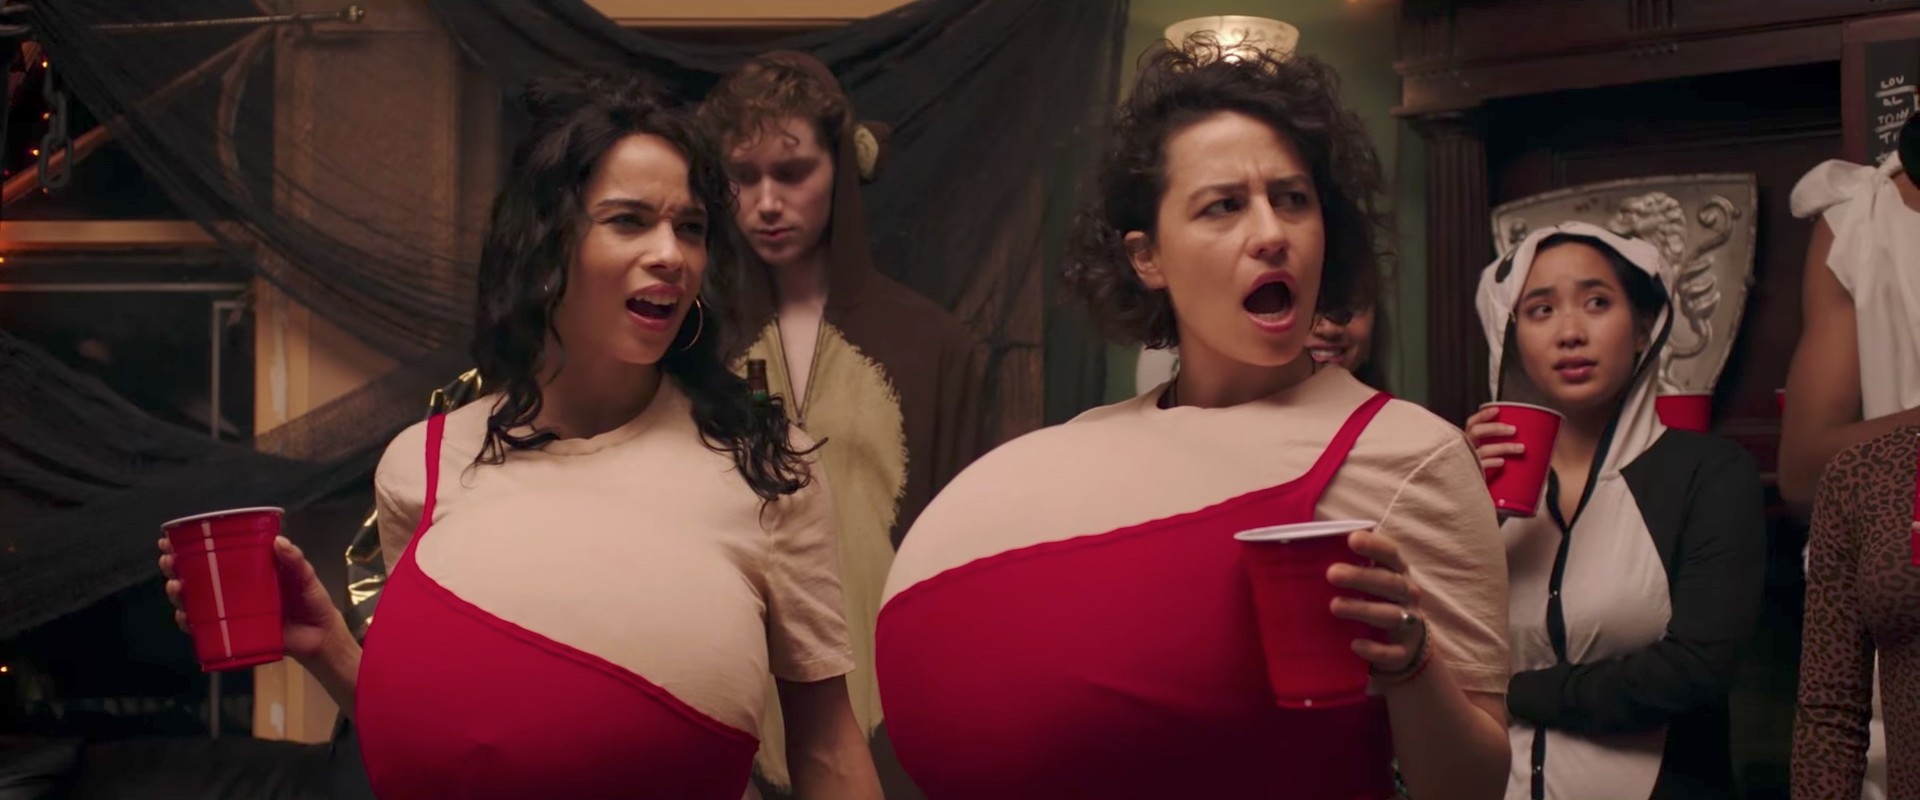 Review: 'Rough Night' is More of the Same but With Women